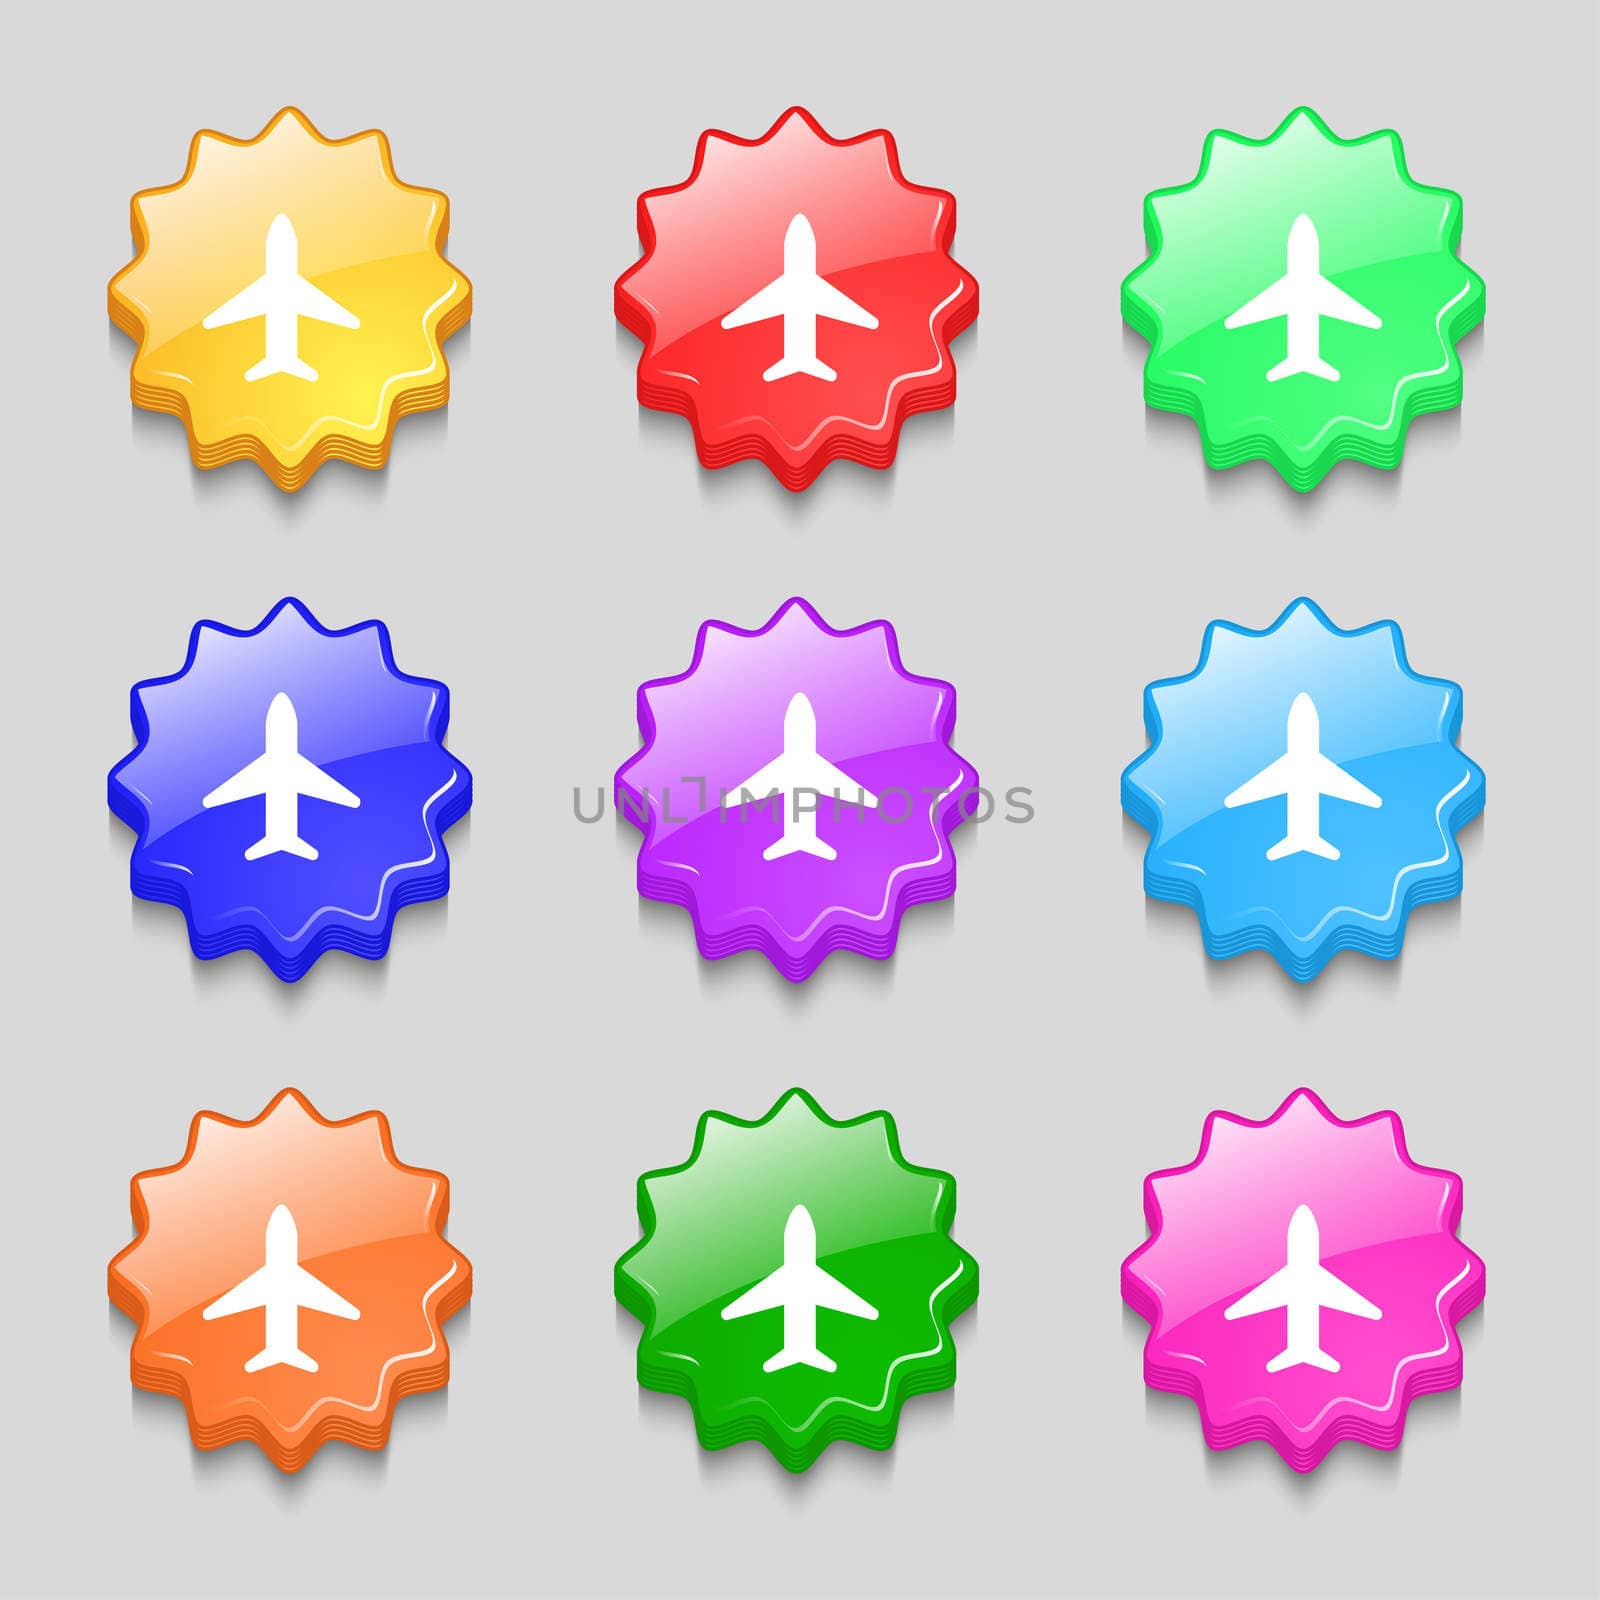 Airplane, Plane, Travel, Flight icon sign. symbol on nine wavy colourful buttons.  by serhii_lohvyniuk